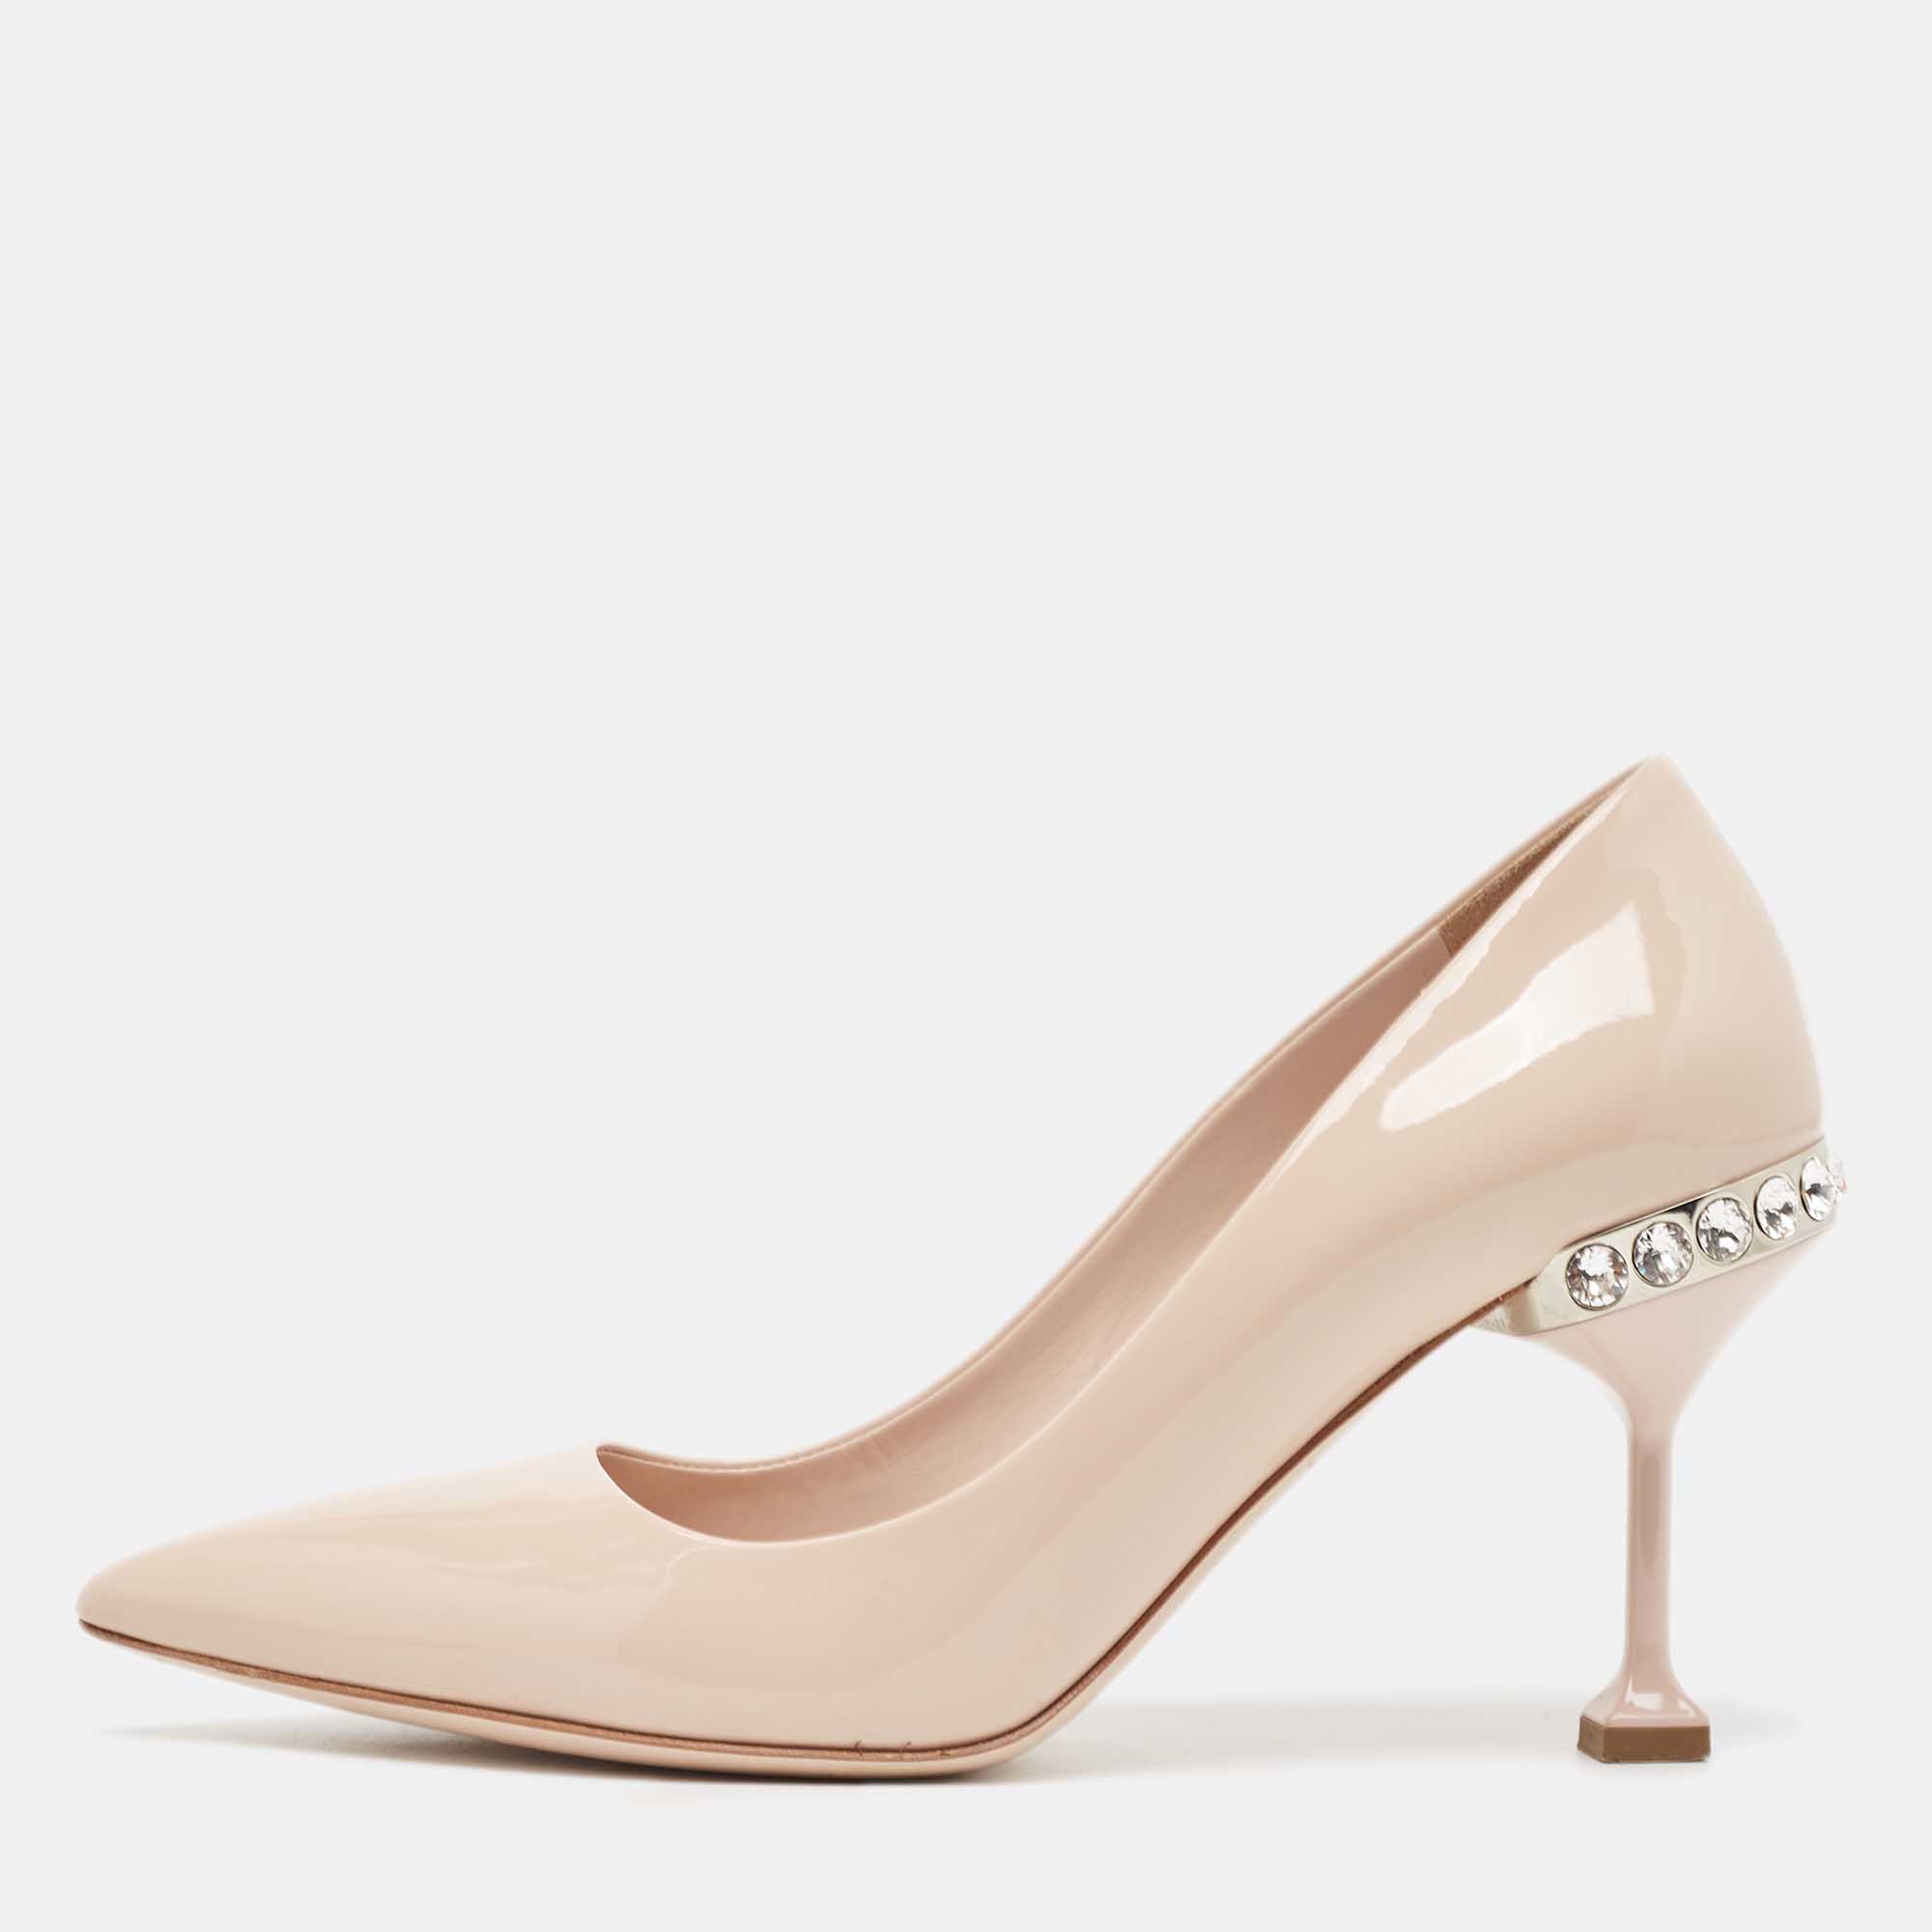 Miu Miu Beige Patent Leather Crystal Embellished Pointed Toe Pumps Size 37